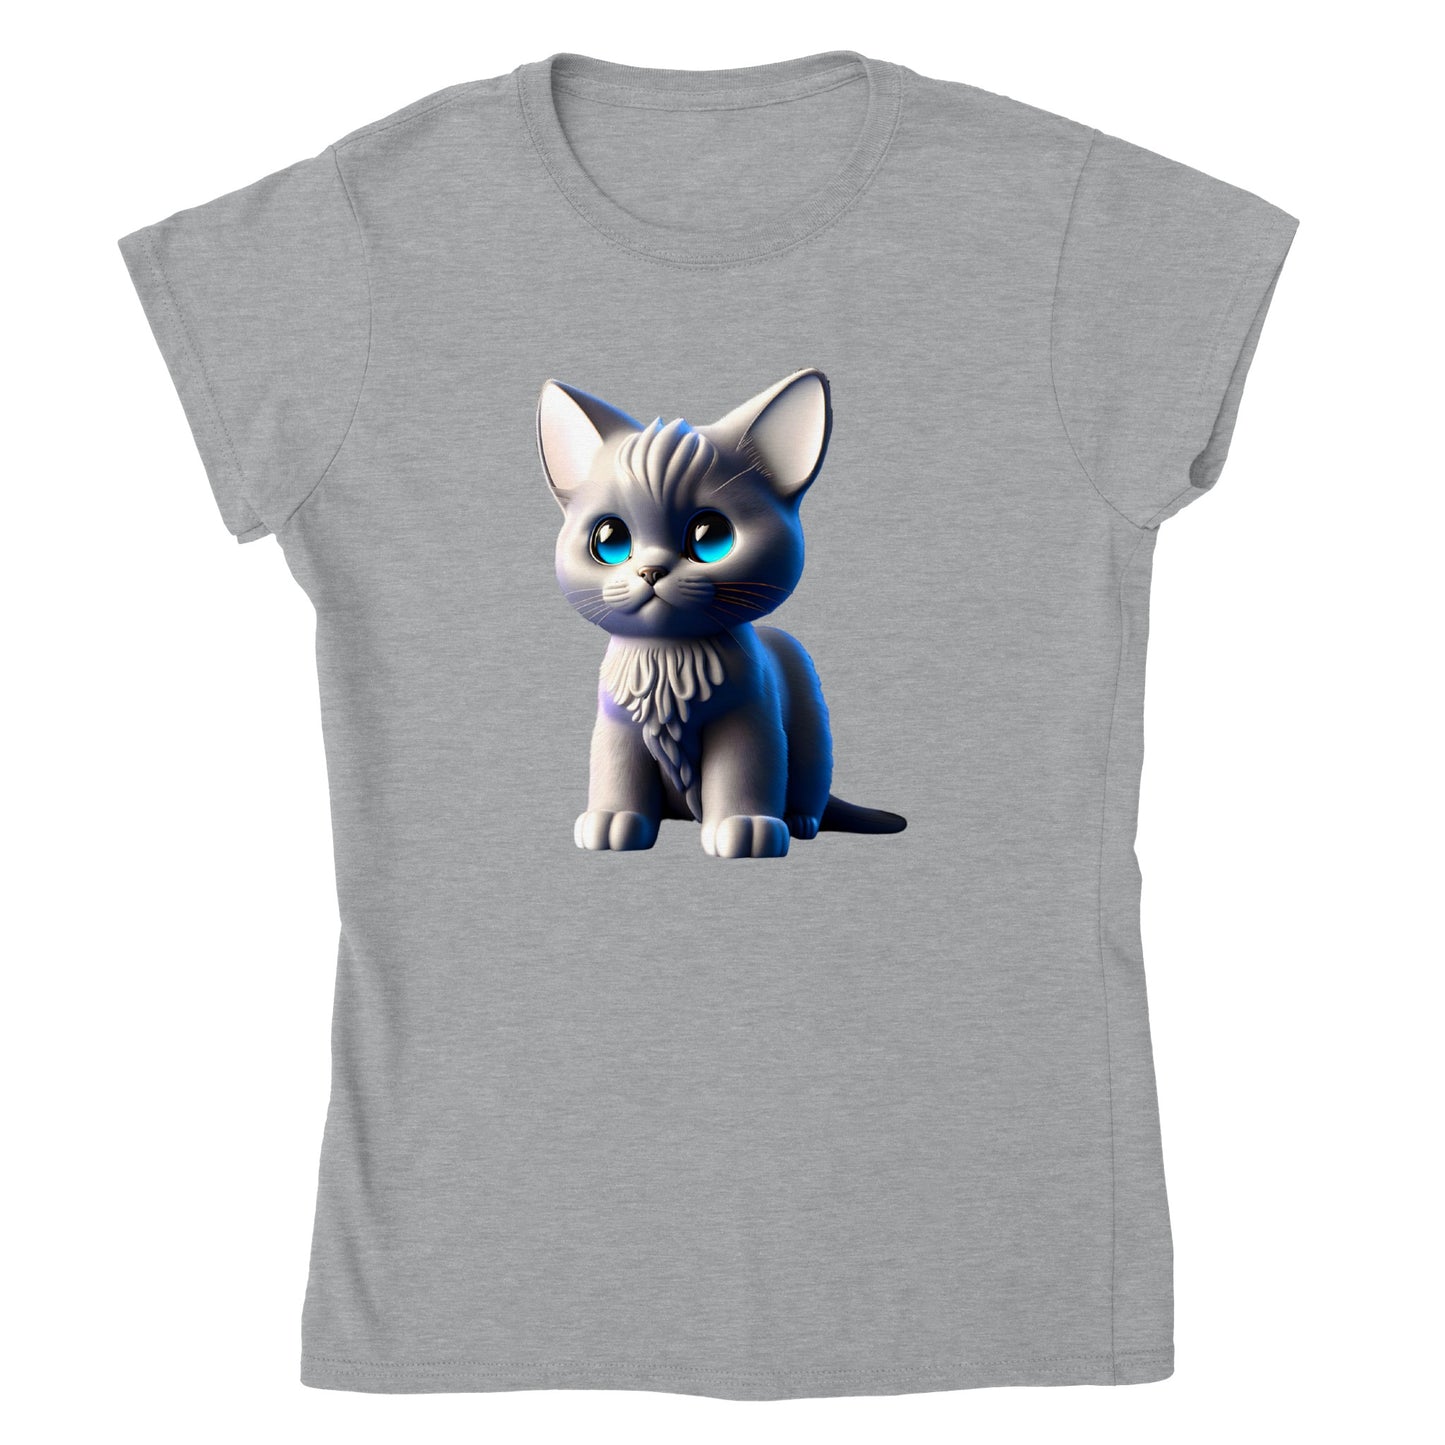 Adorable, Cool, Cute Cats and Kittens Toy - Classic Women’s Crewneck T-Shirt 38